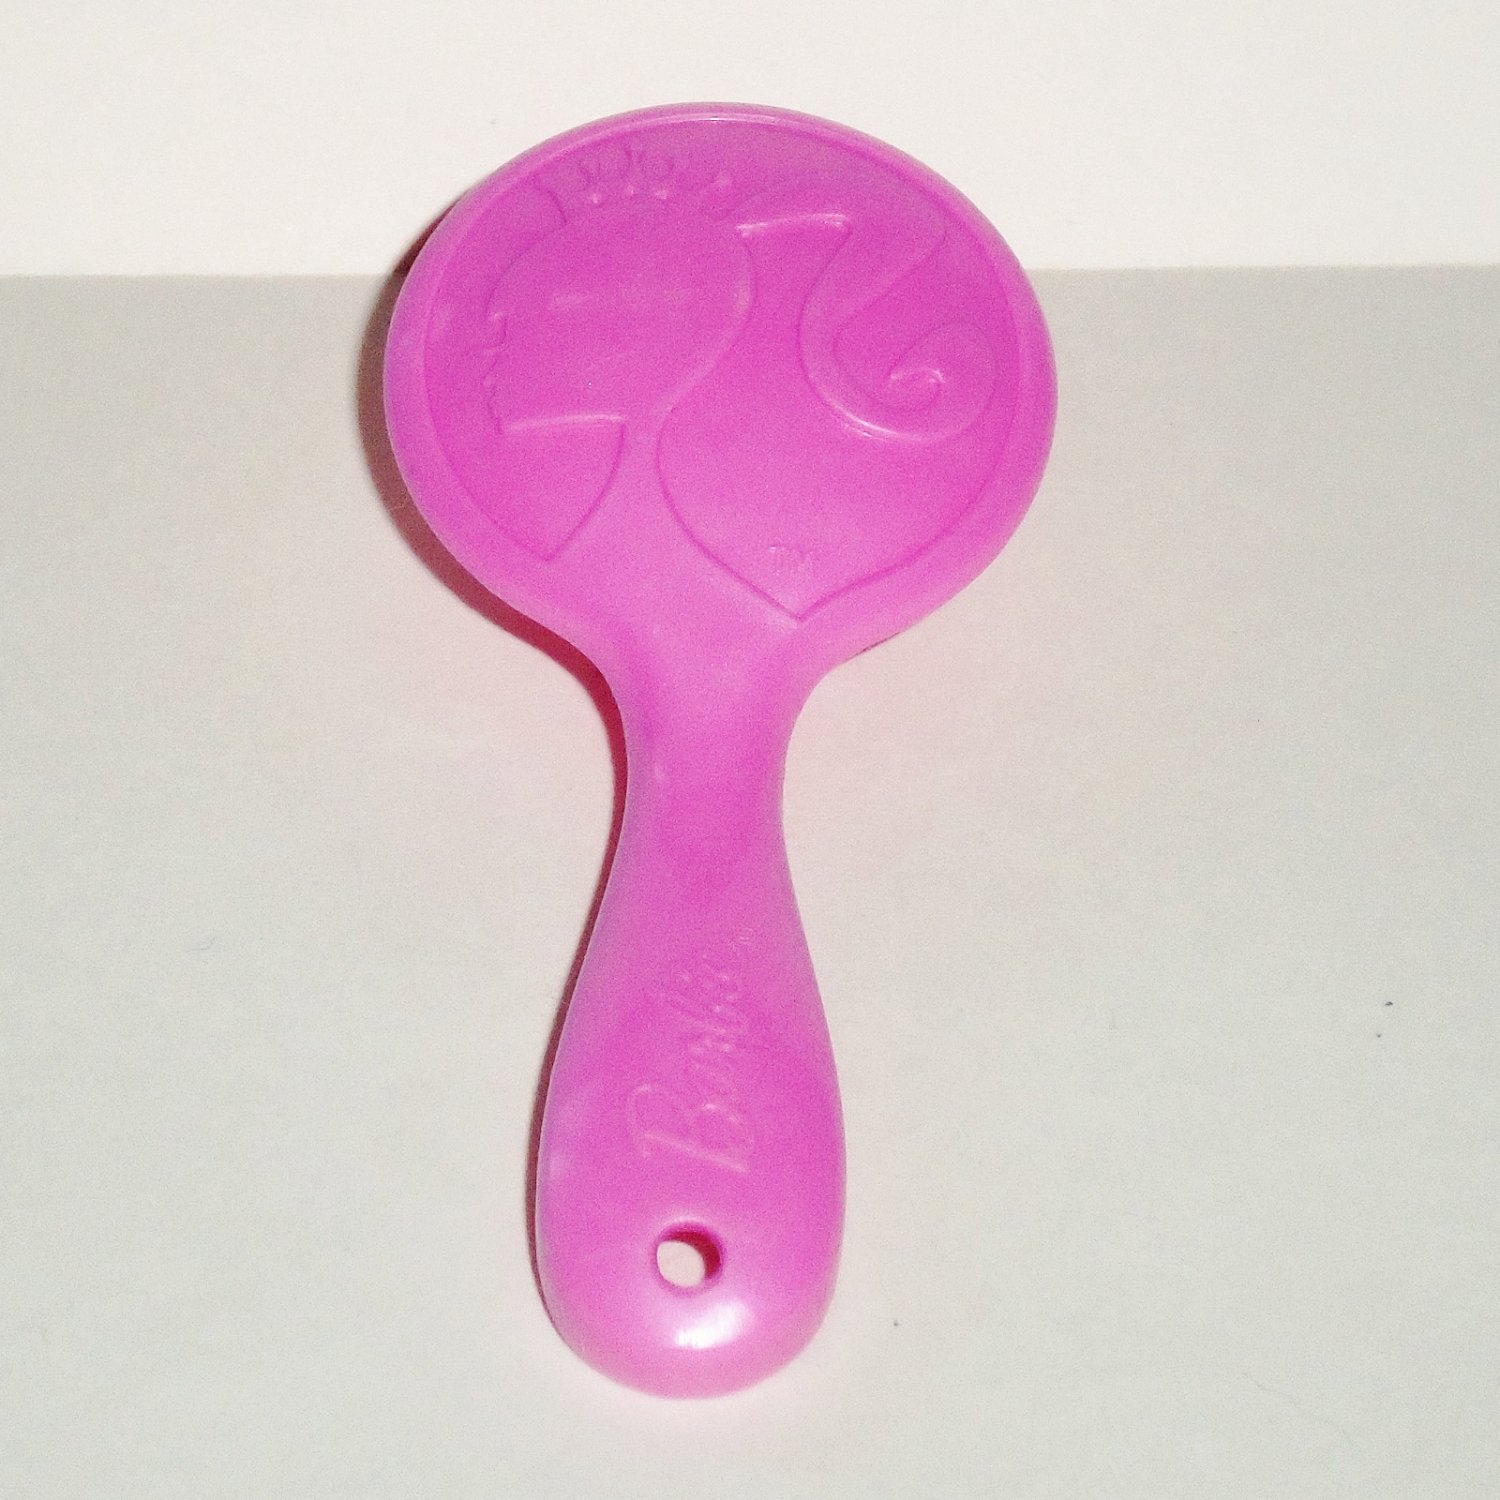 Barbie Light Pink Doll Hair Brush with Silhouette and Logo Mattel